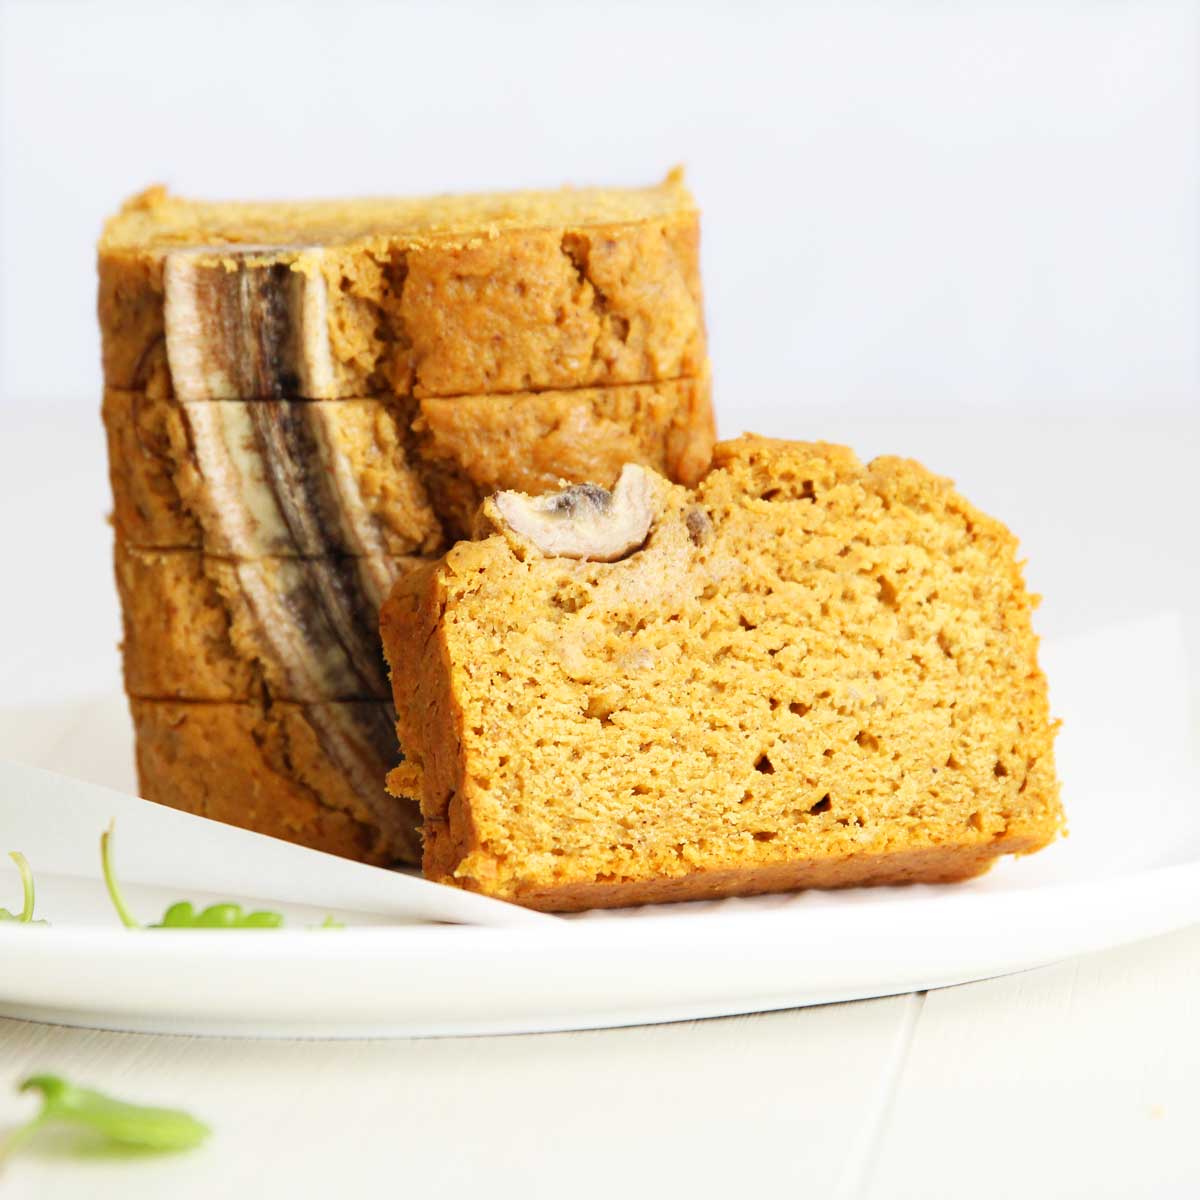 Super Moist Olive Oil Pumpkin Bread With Banana (Eggless & Dairy Free) - topping variations